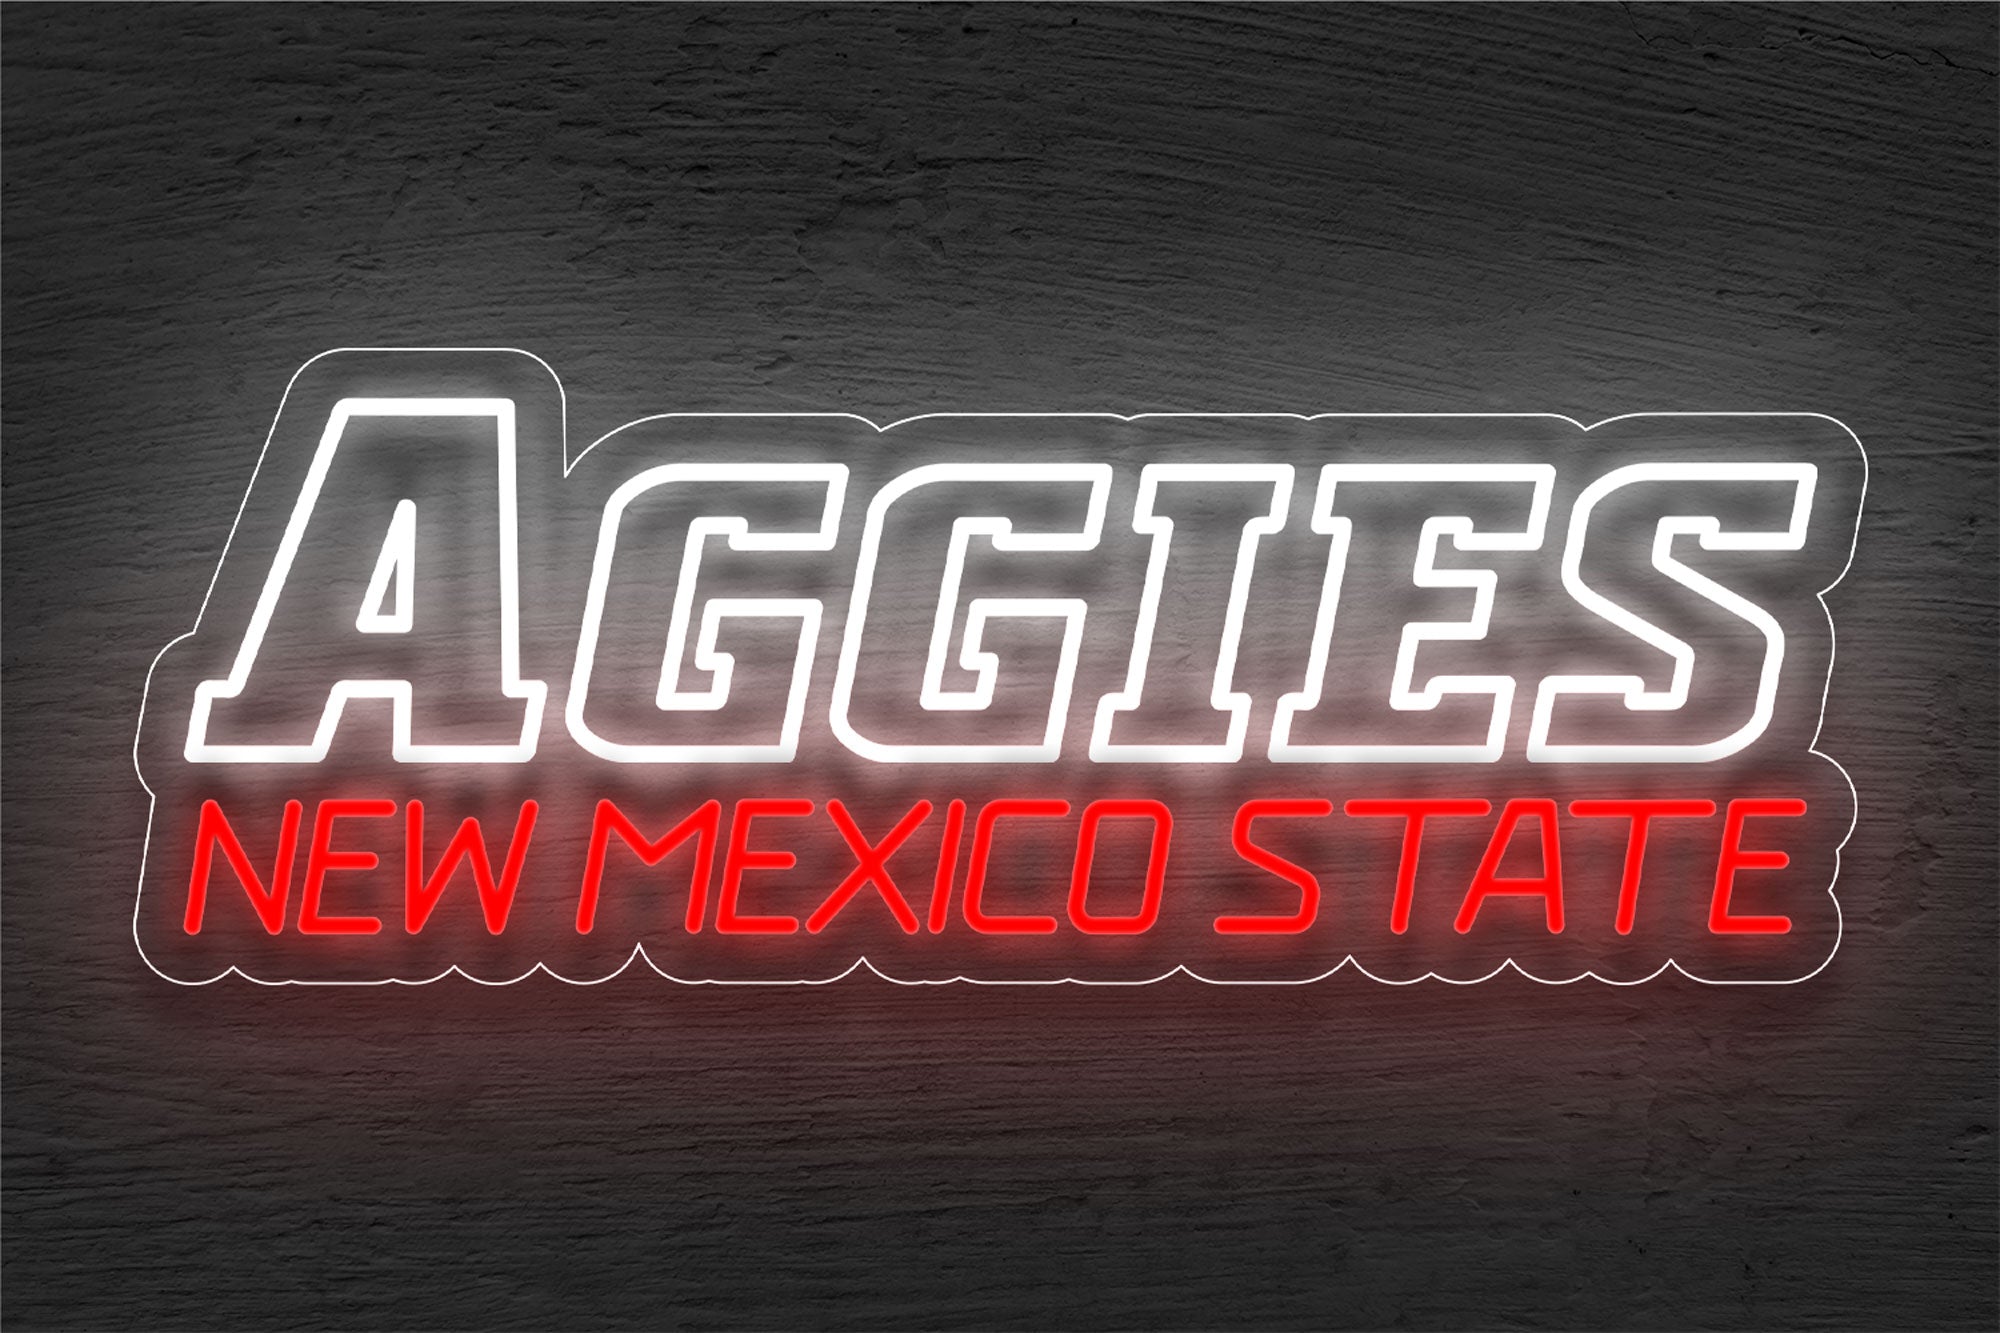 New Mexico State Aggies Men's Basketball LED Neon Sign